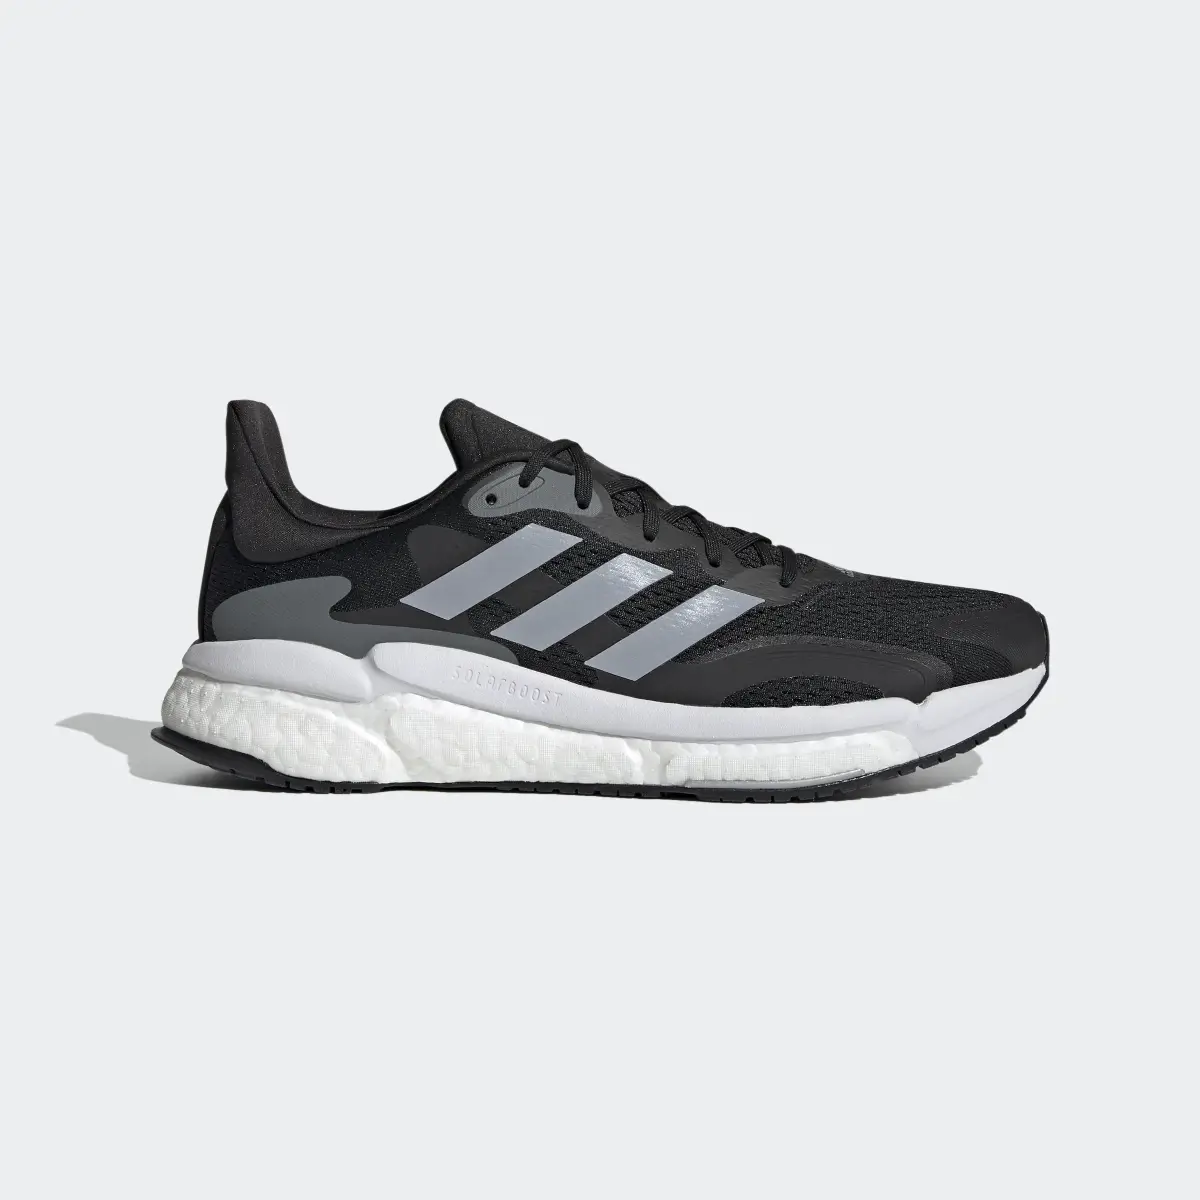 Adidas SolarBoost 3 Shoes. 2